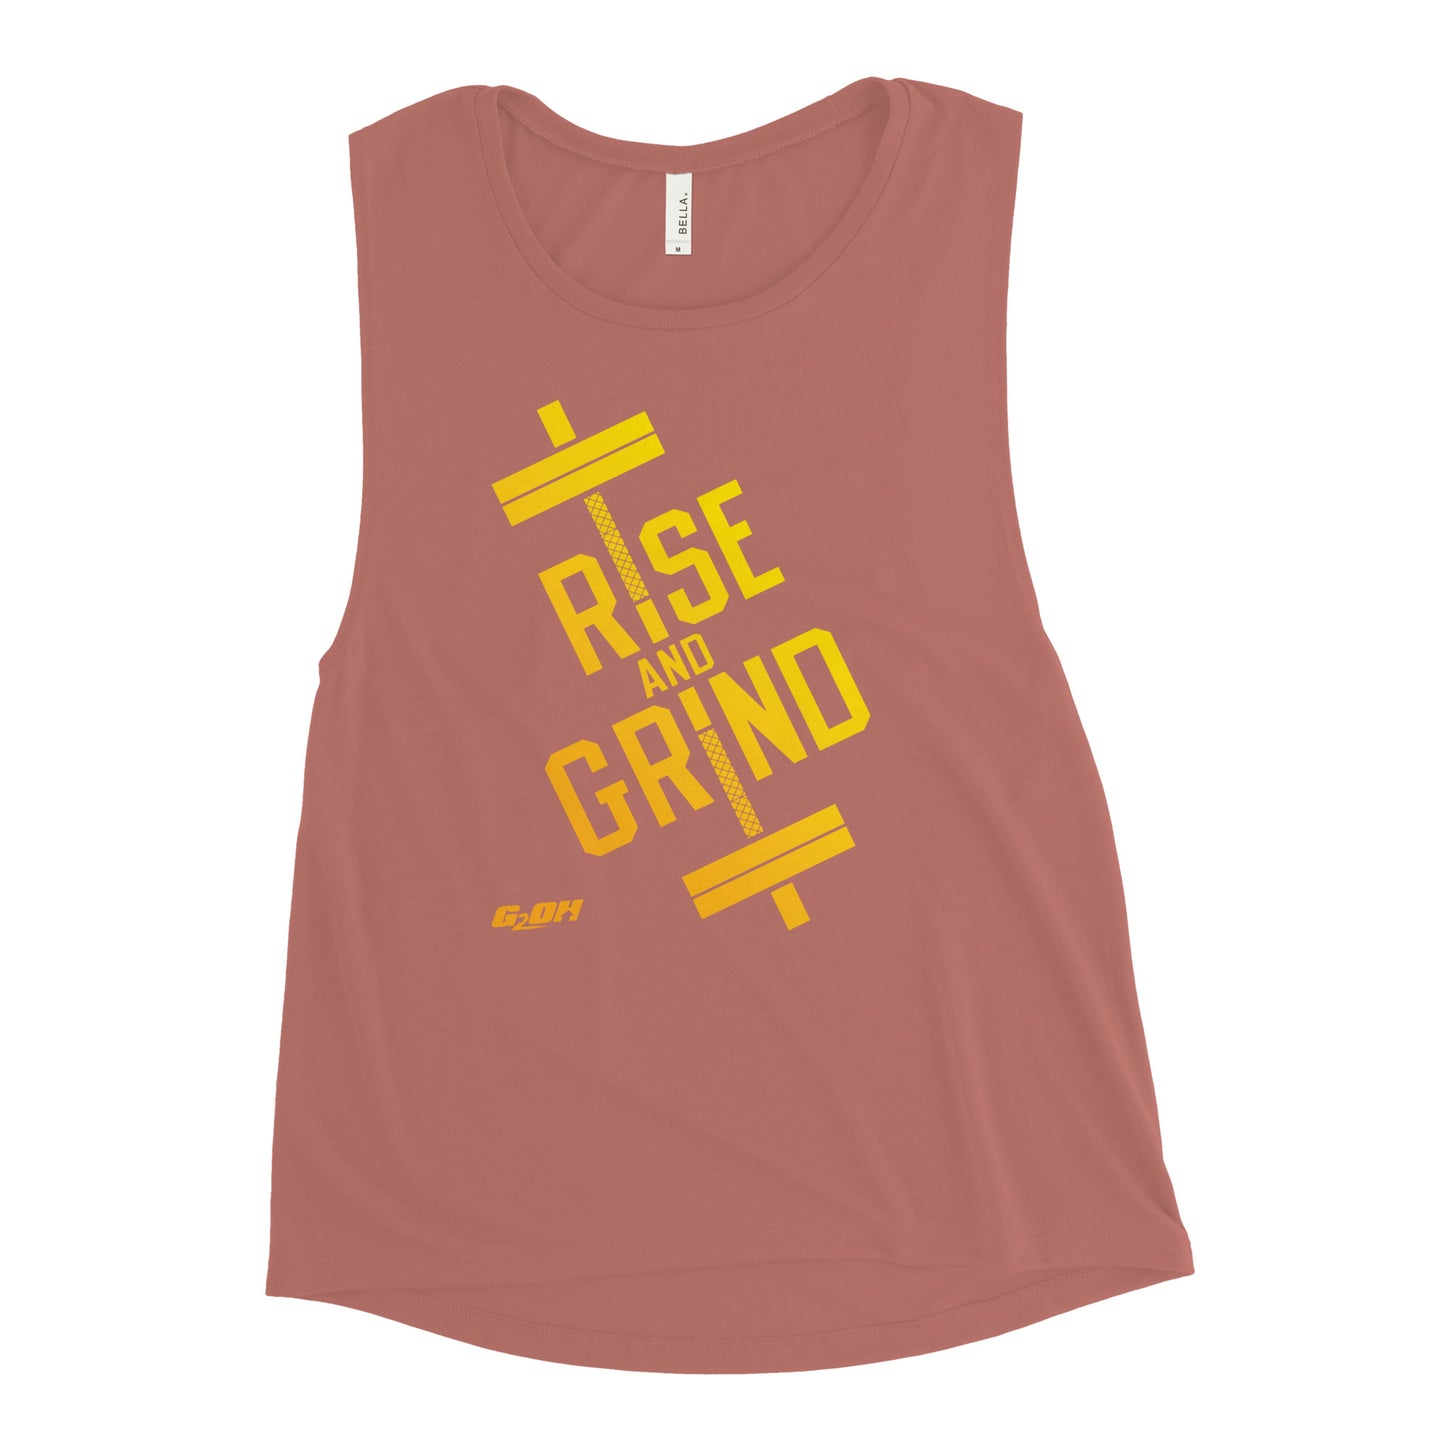 Rise And Grind Women's Muscle Tank